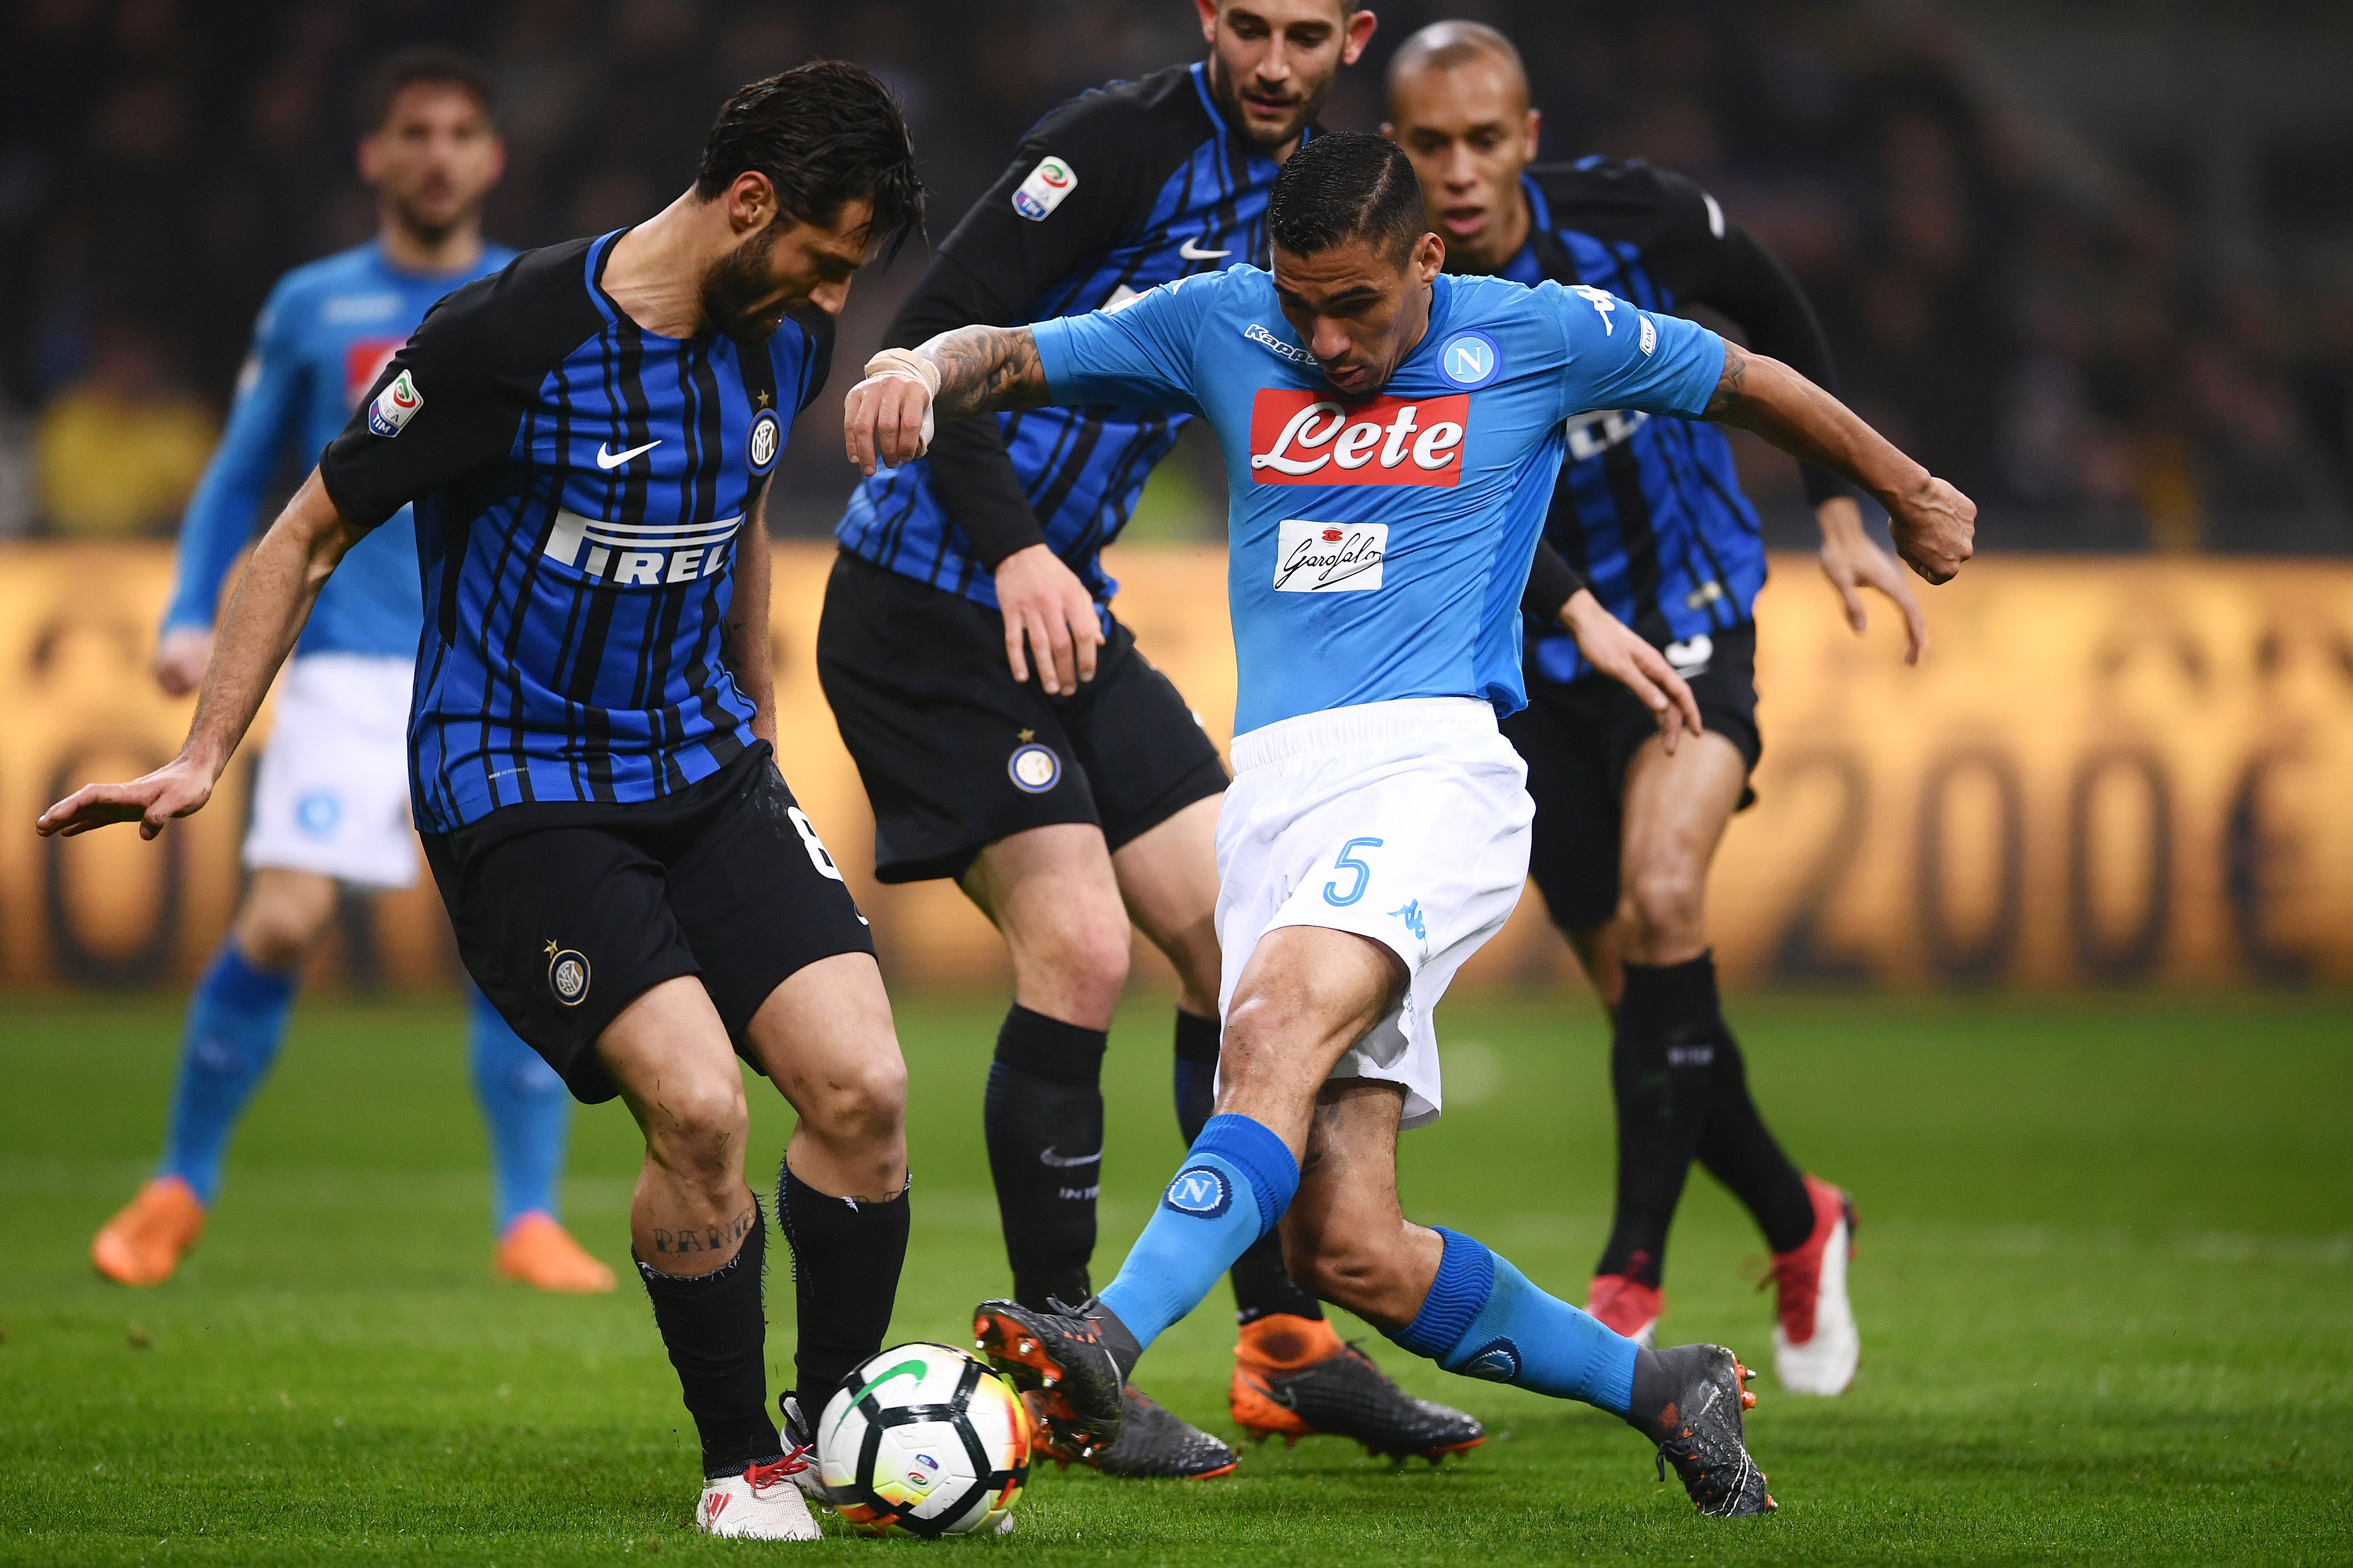 Inter Milan's defender Andrea Ranocchia from Italy (L) fights for the ball with Napoli's midfielder Allan from Brazil (C) during  the Italian Serie A football match between Inter Milan and Napoli on March 11, 2018, at the San Siro Stadium in Milan. / AFP PHOTO / MARCO BERTORELLO        (Photo credit should read MARCO BERTORELLO/AFP/Getty Images)